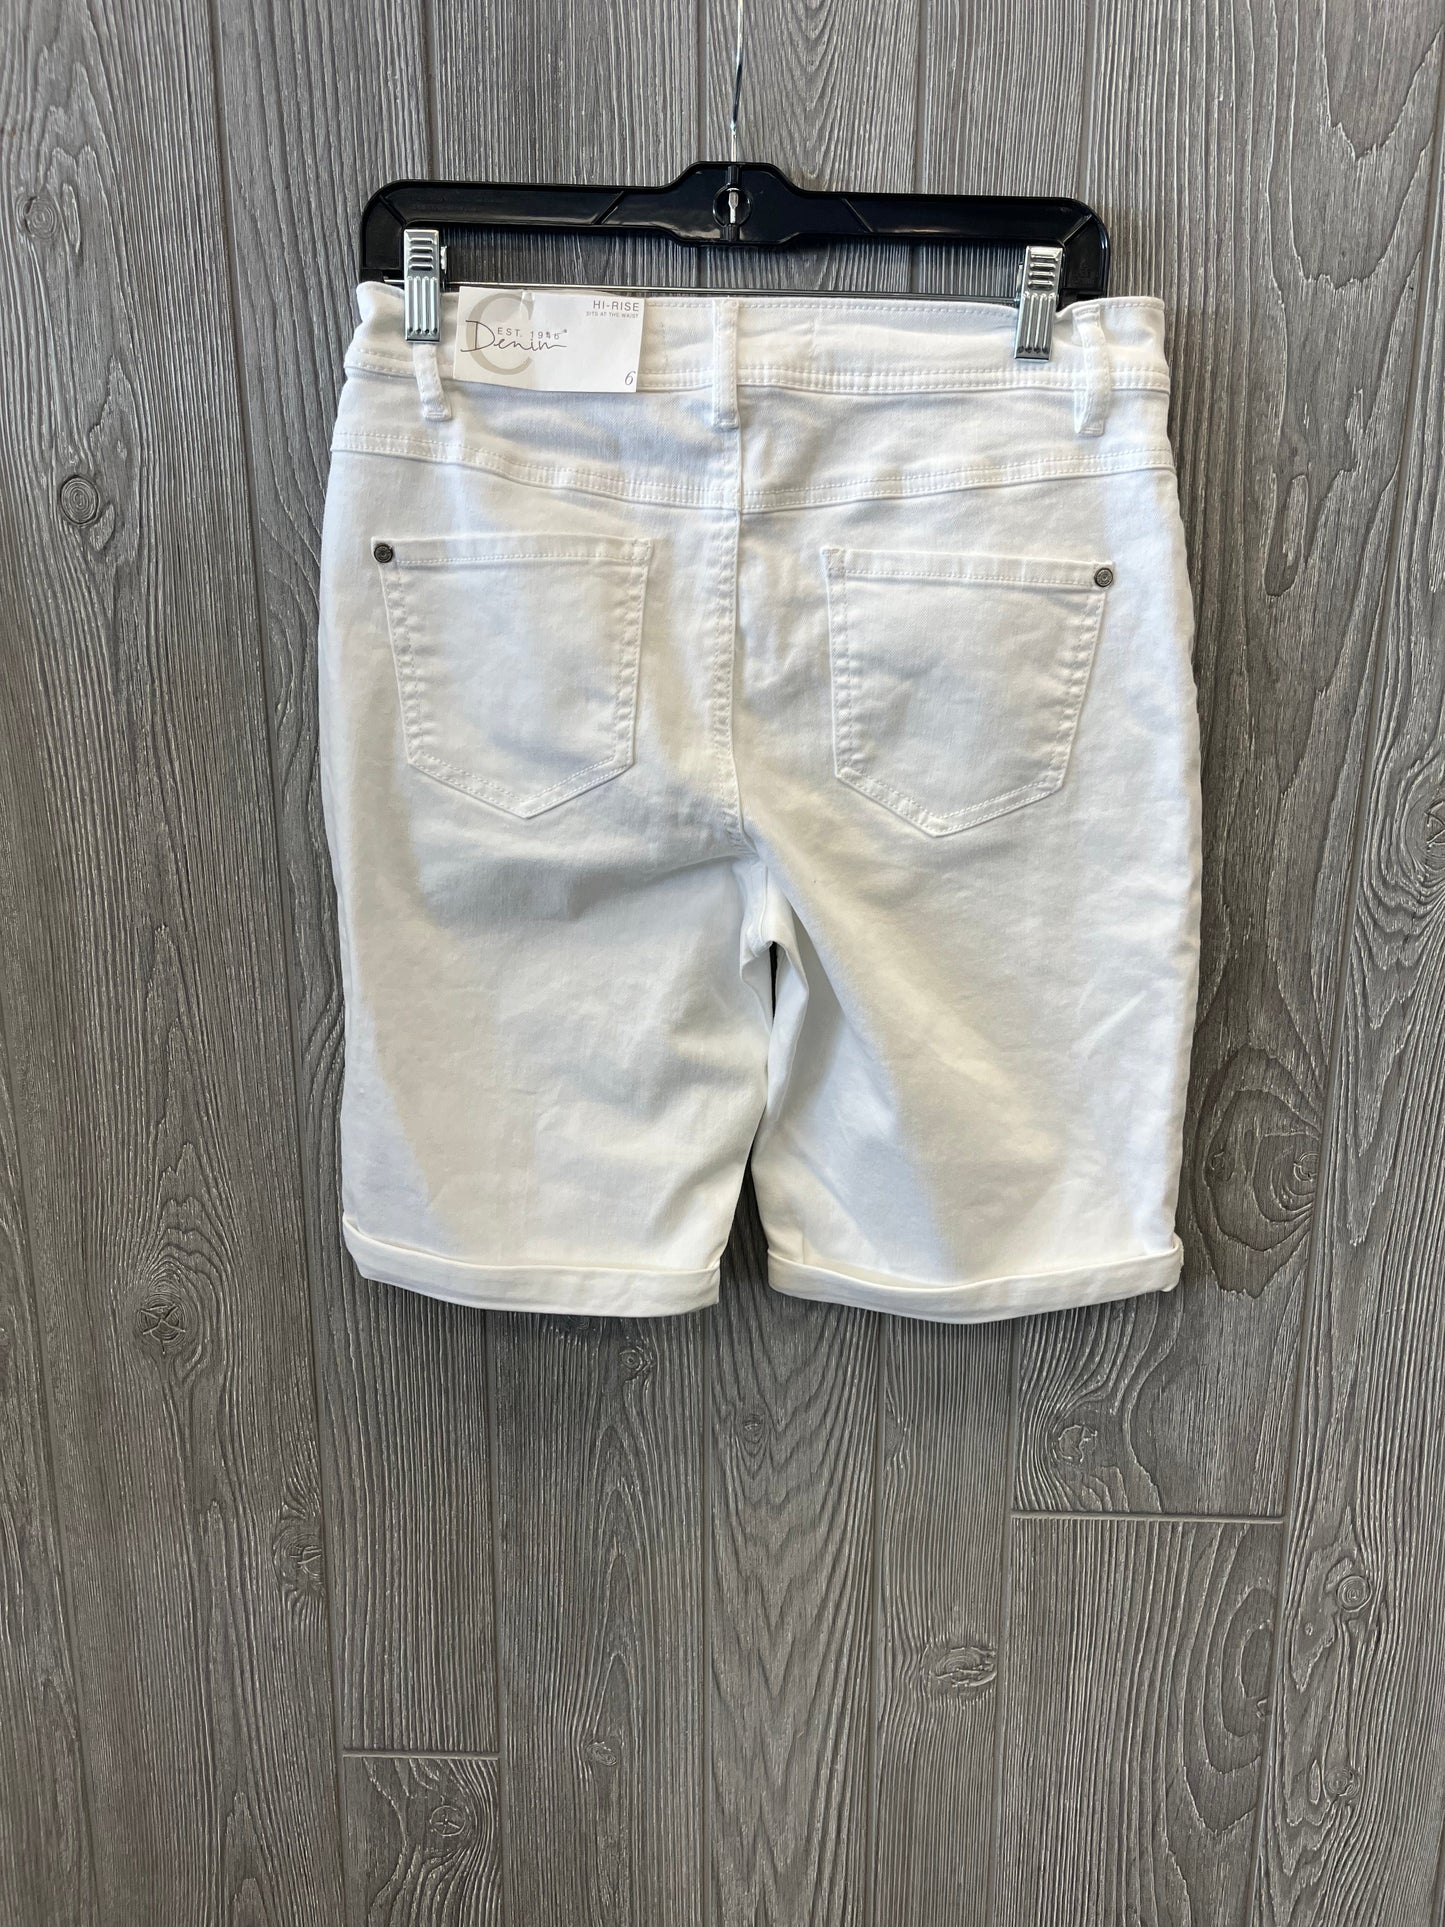 Shorts By Cato  Size: 6